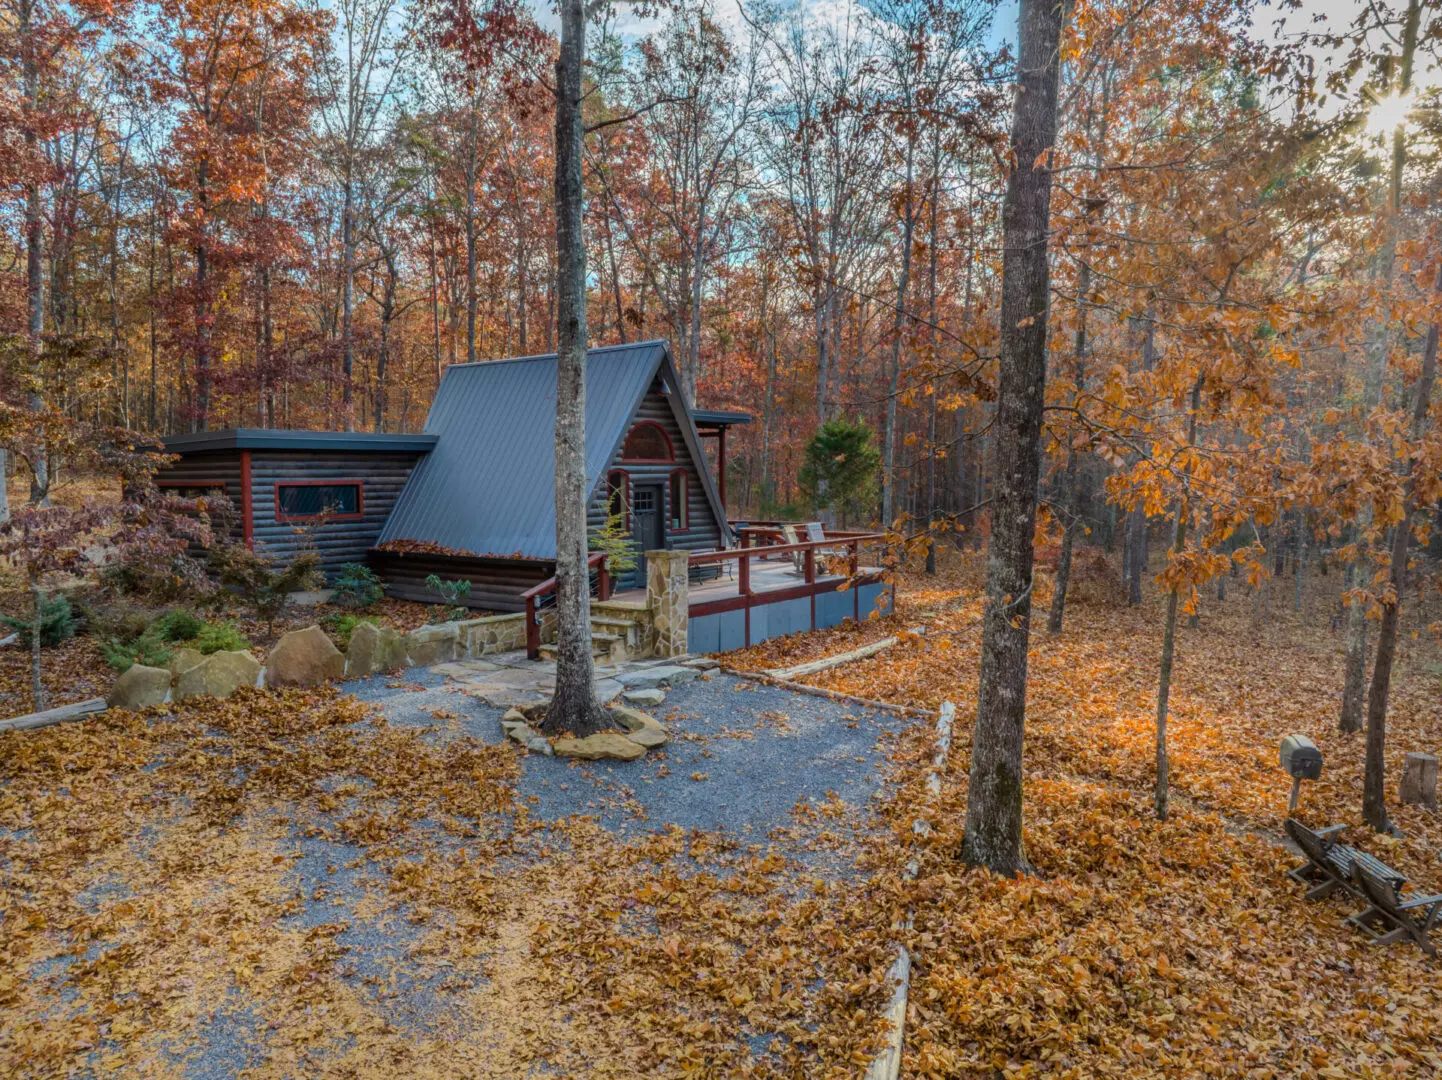 An aerial view of Little River Point cabin nestled in the woods.